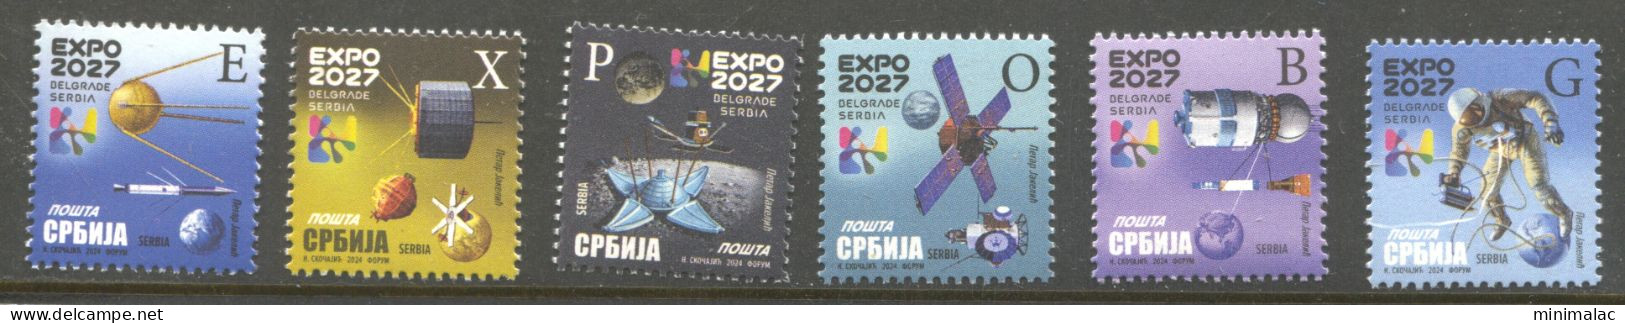 Serbia 2024, Definitive Postage Stamps Of The Republic Of Serbia 2024-2027, EXPO 2027, Space. Full Series 6 Pts, MNH - Serbie